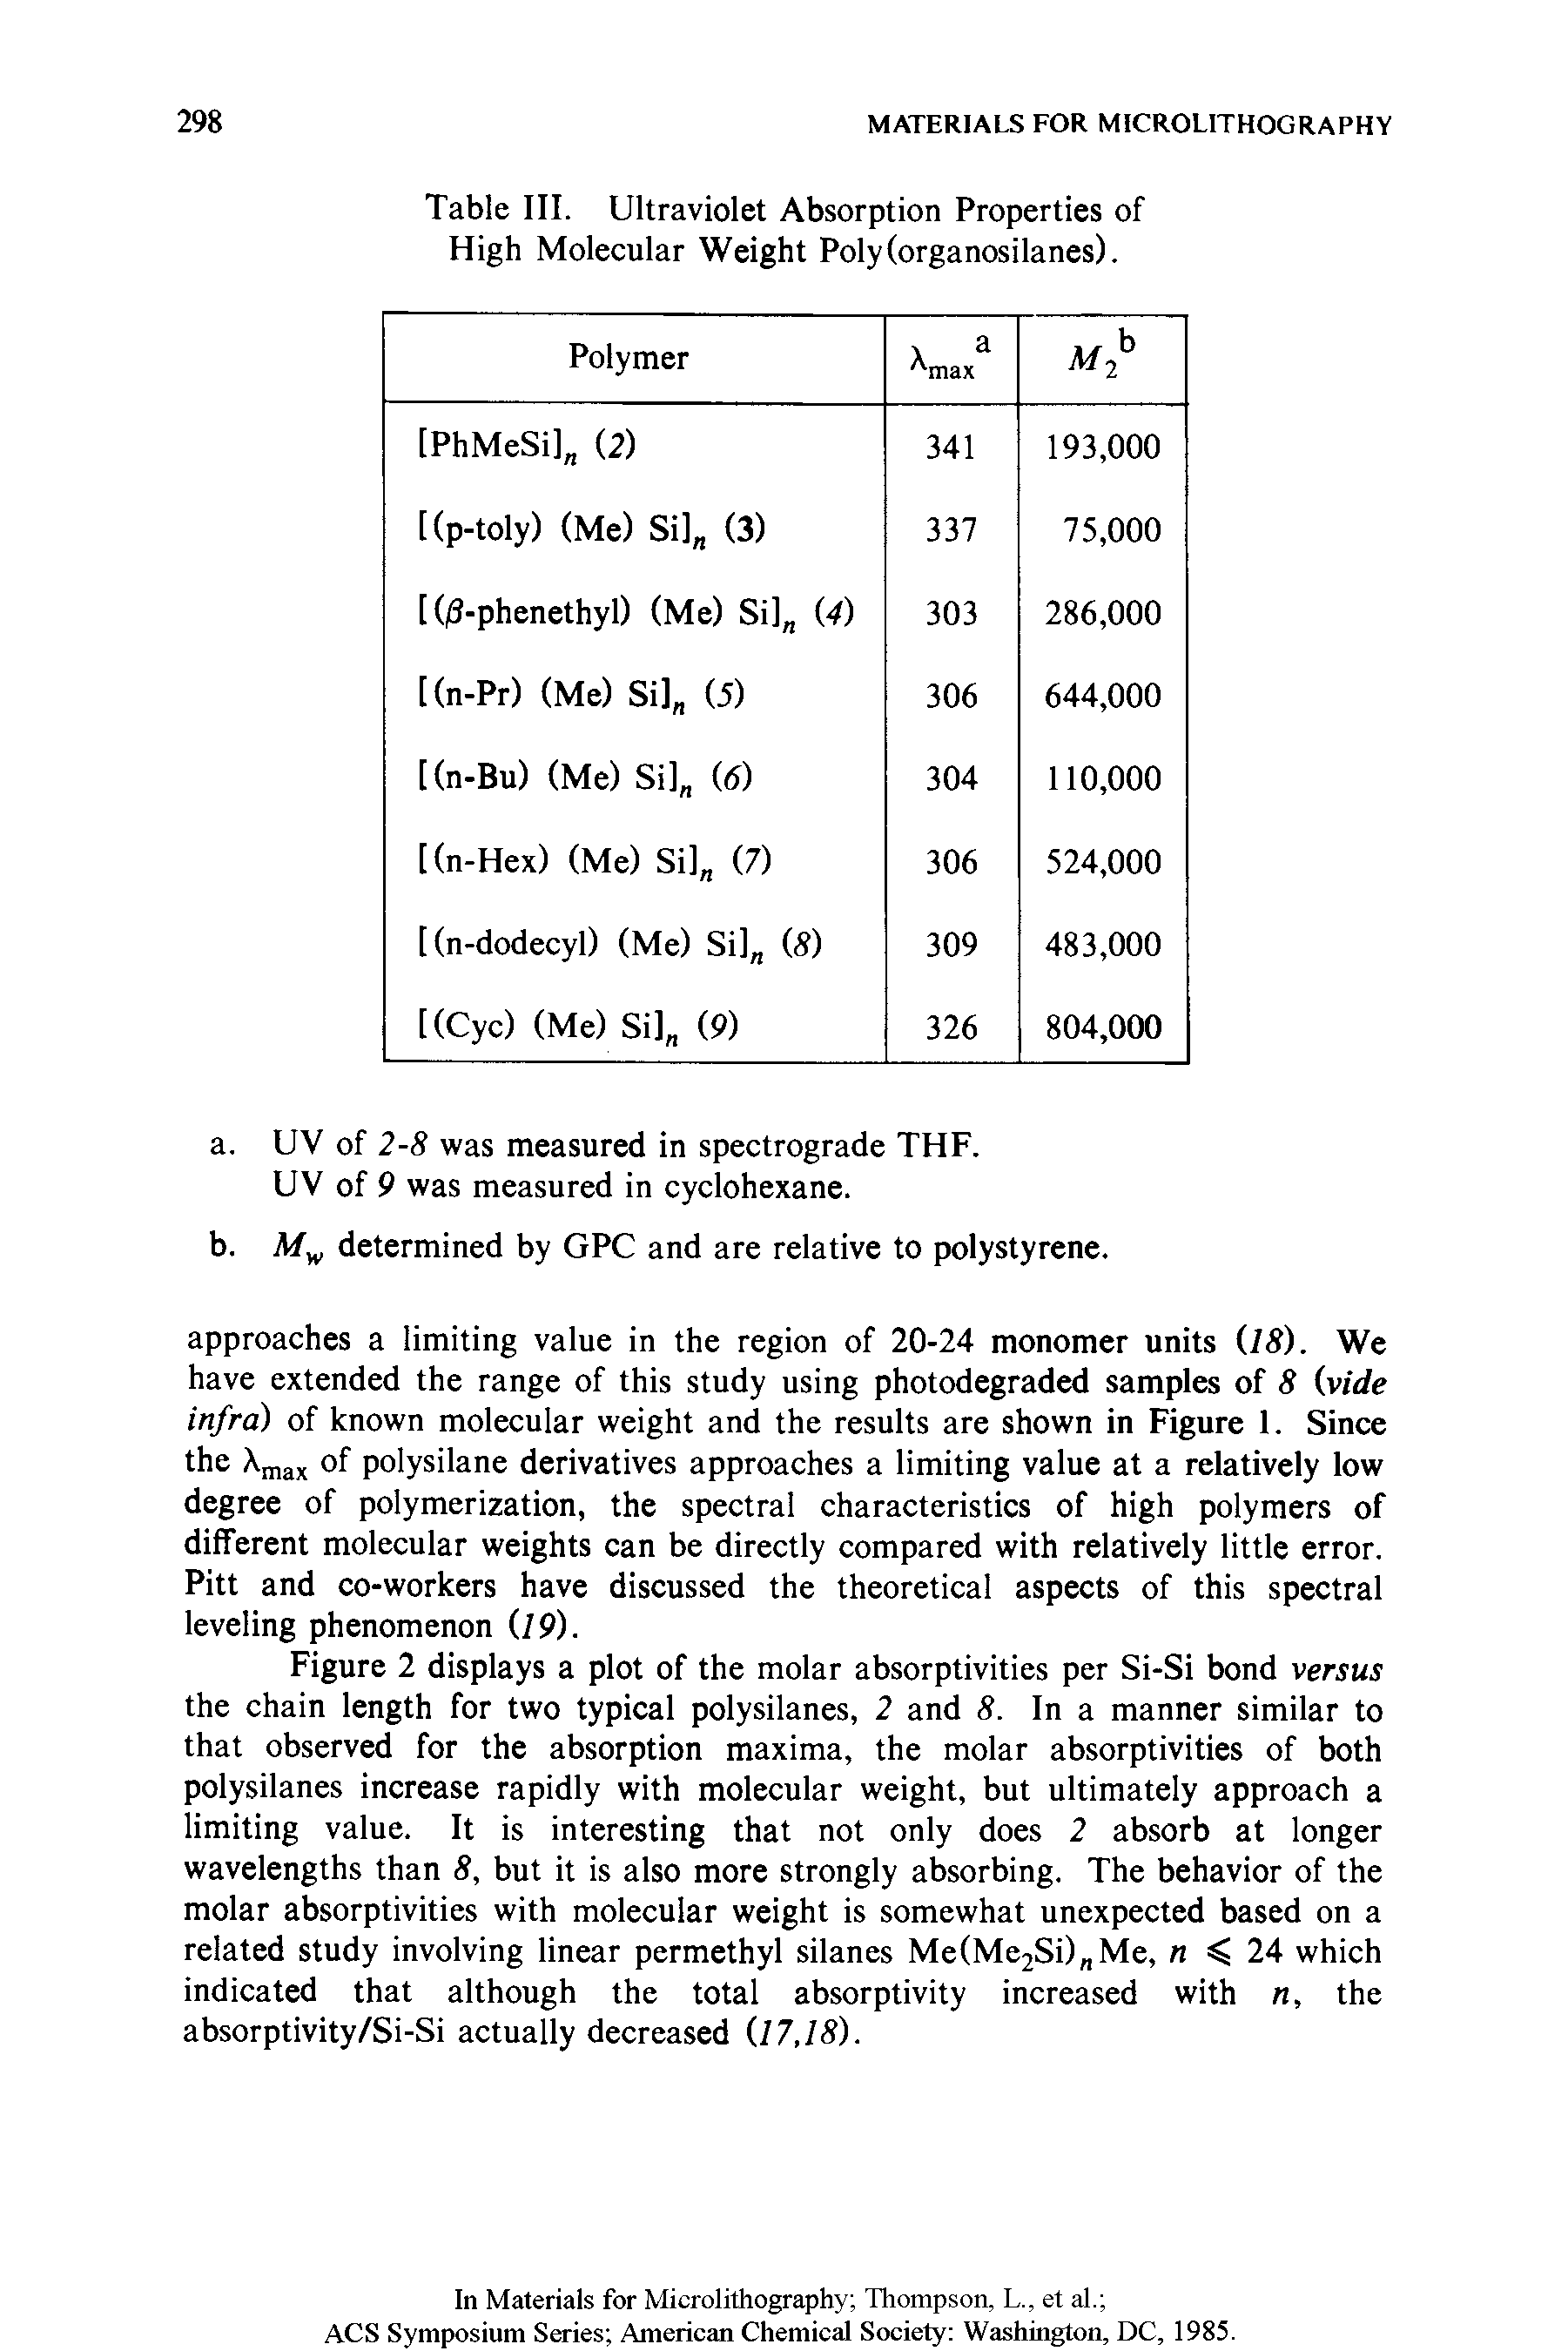 Table III. Ultraviolet Absorption Properties of High Molecular Weight Poly(organosilanes).